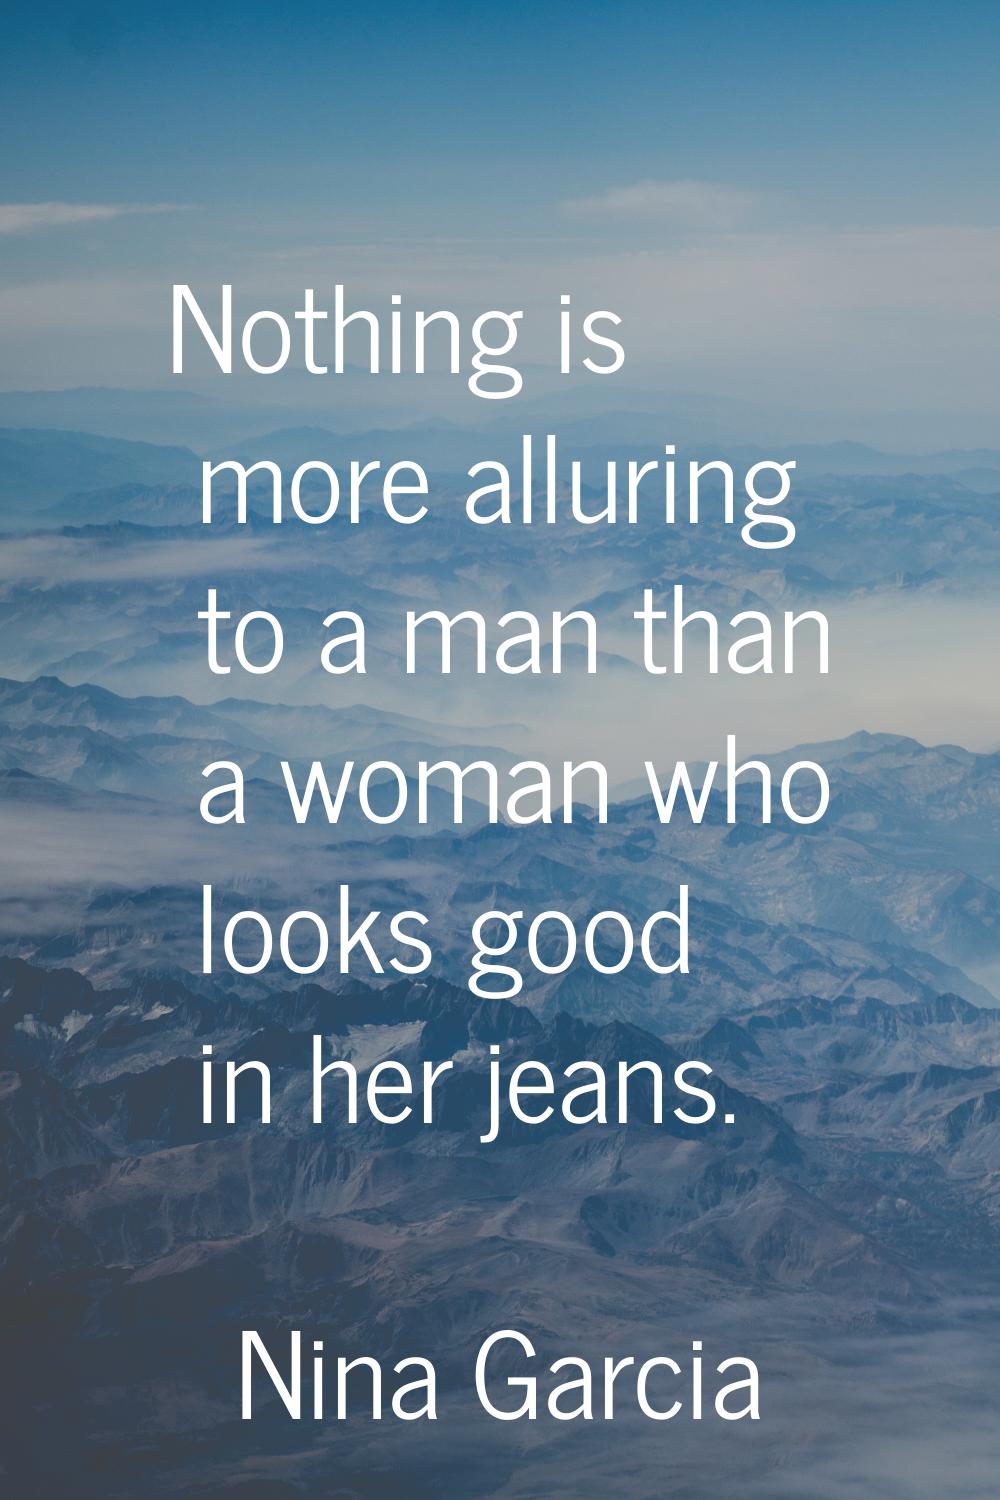 Nothing is more alluring to a man than a woman who looks good in her jeans.